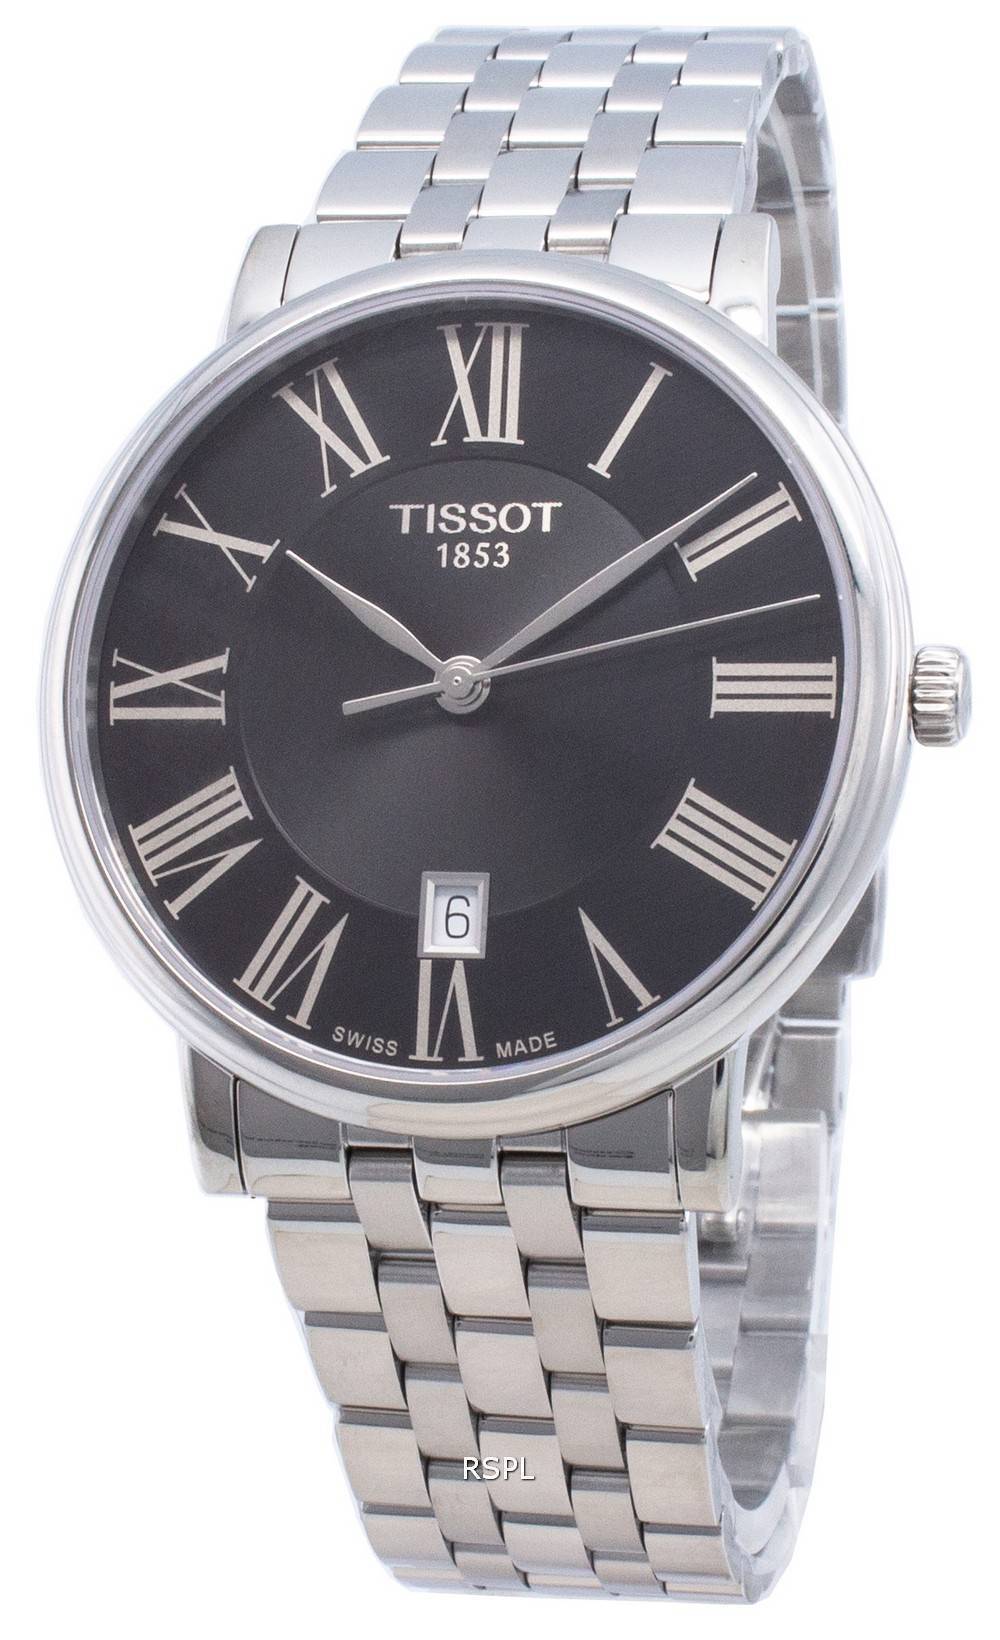 TISSOT: Stainless Steel Quartz Watch
Name: CARSON
Clasp: Integrated
Finish: Satin and Polish
Dial Color: BLACK
MM: 40